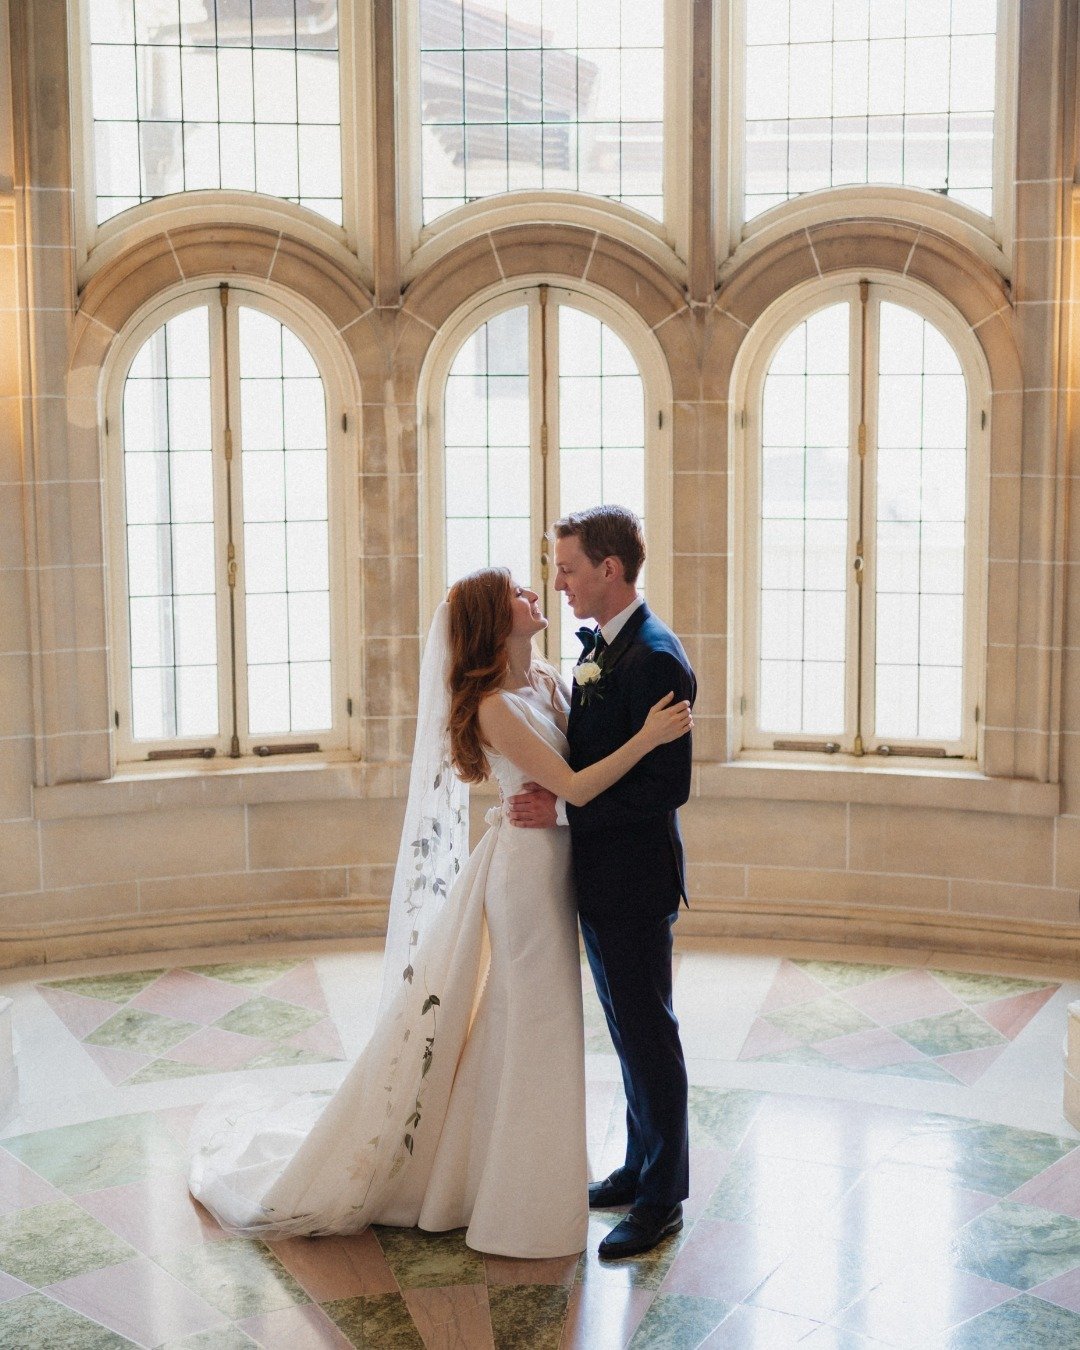 Better late than never, right?

Excited to relive the magic of Tom &amp; Ansley's wedding at the Armour House in Chicago through these captured moments.

Stay tuned for more glimpses into Tom &amp; Ansley's unforgettable wedding day!

Venue: @armourh